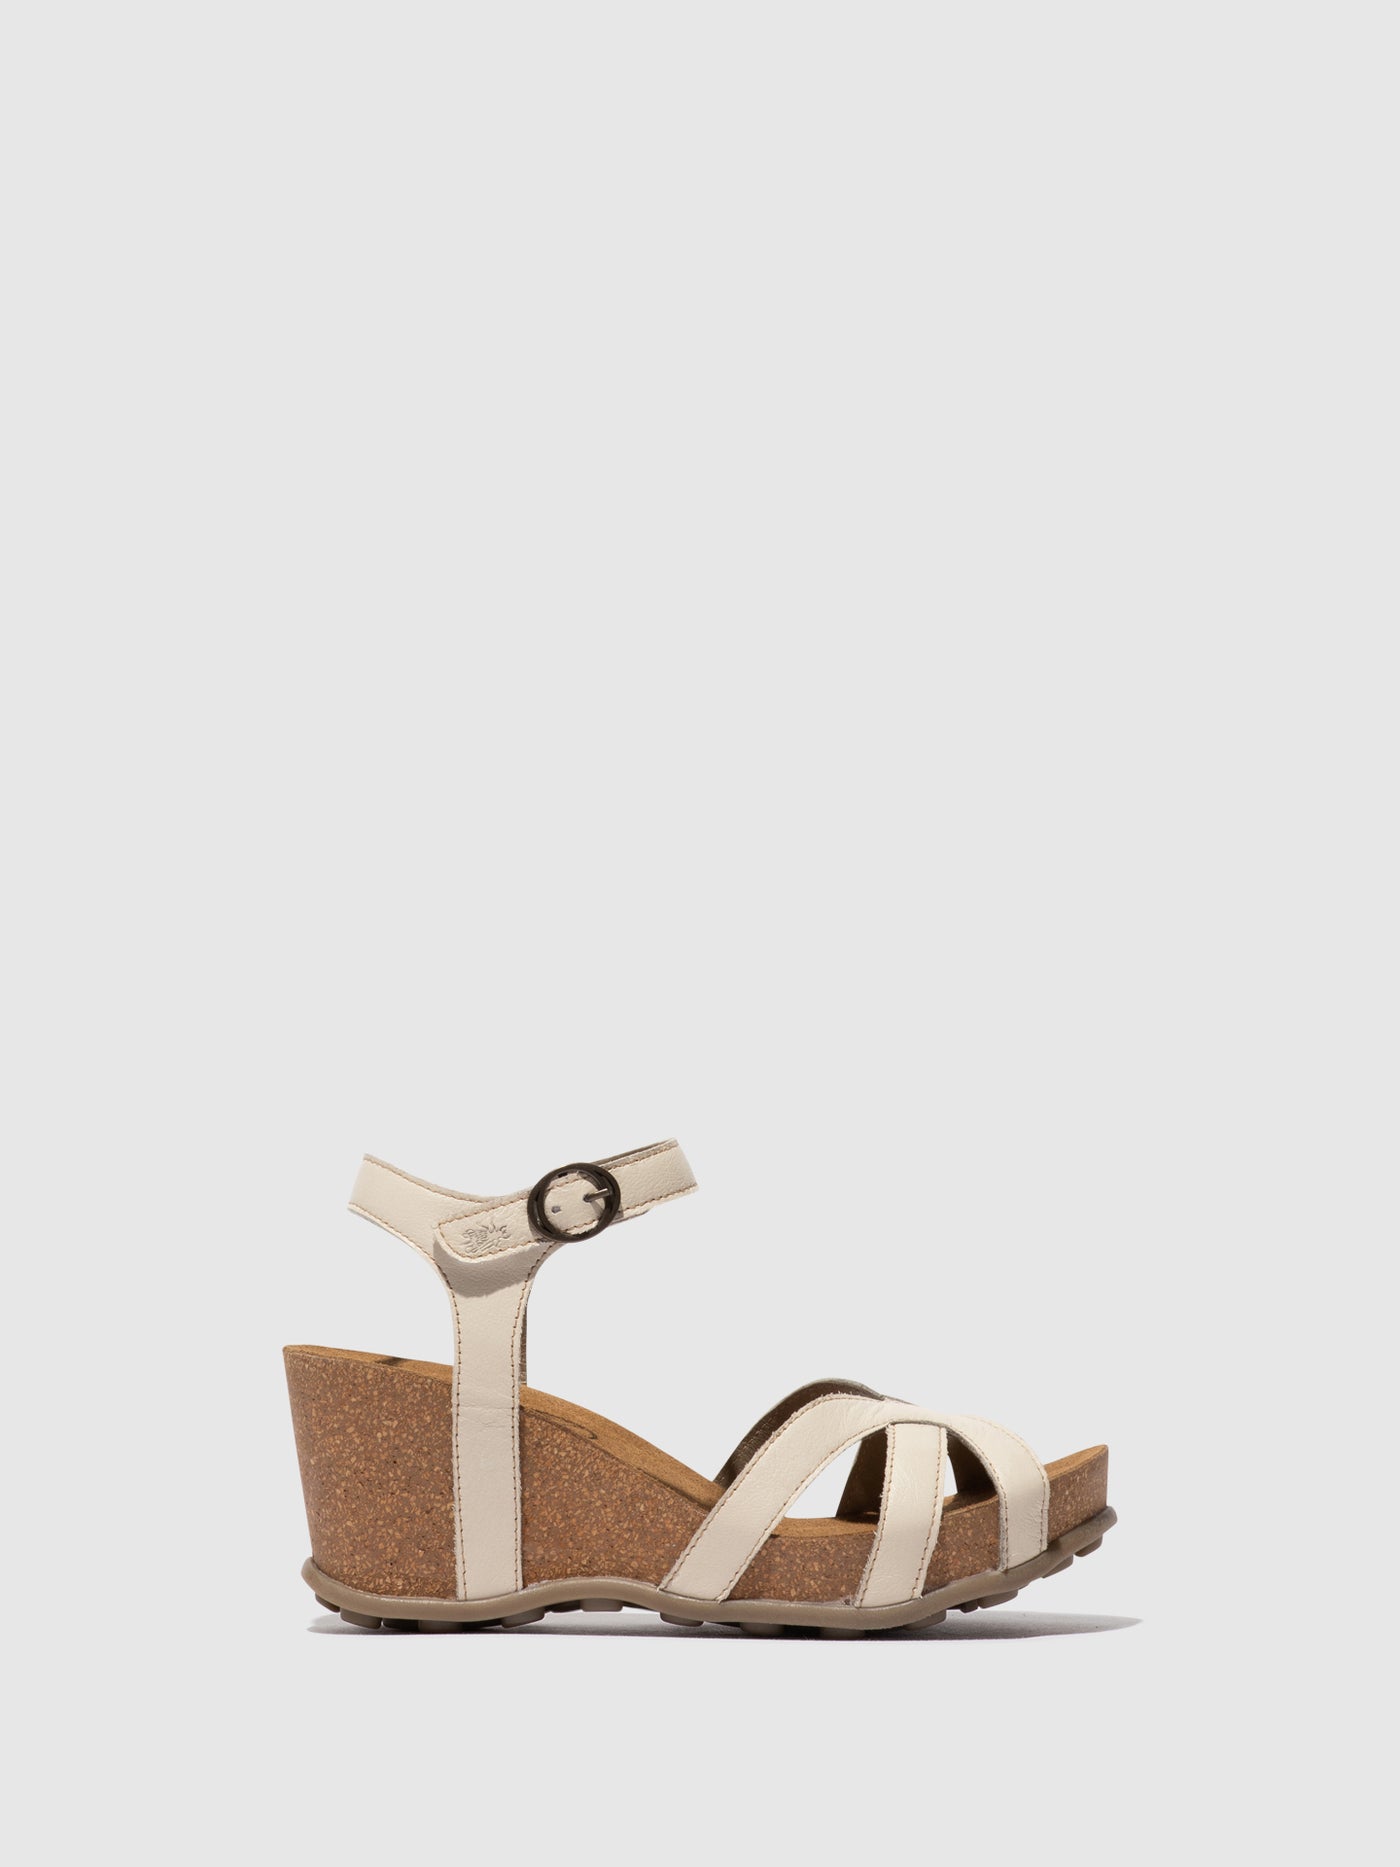 Ankle Strap Sandals GETA855FLY OFFWHITE